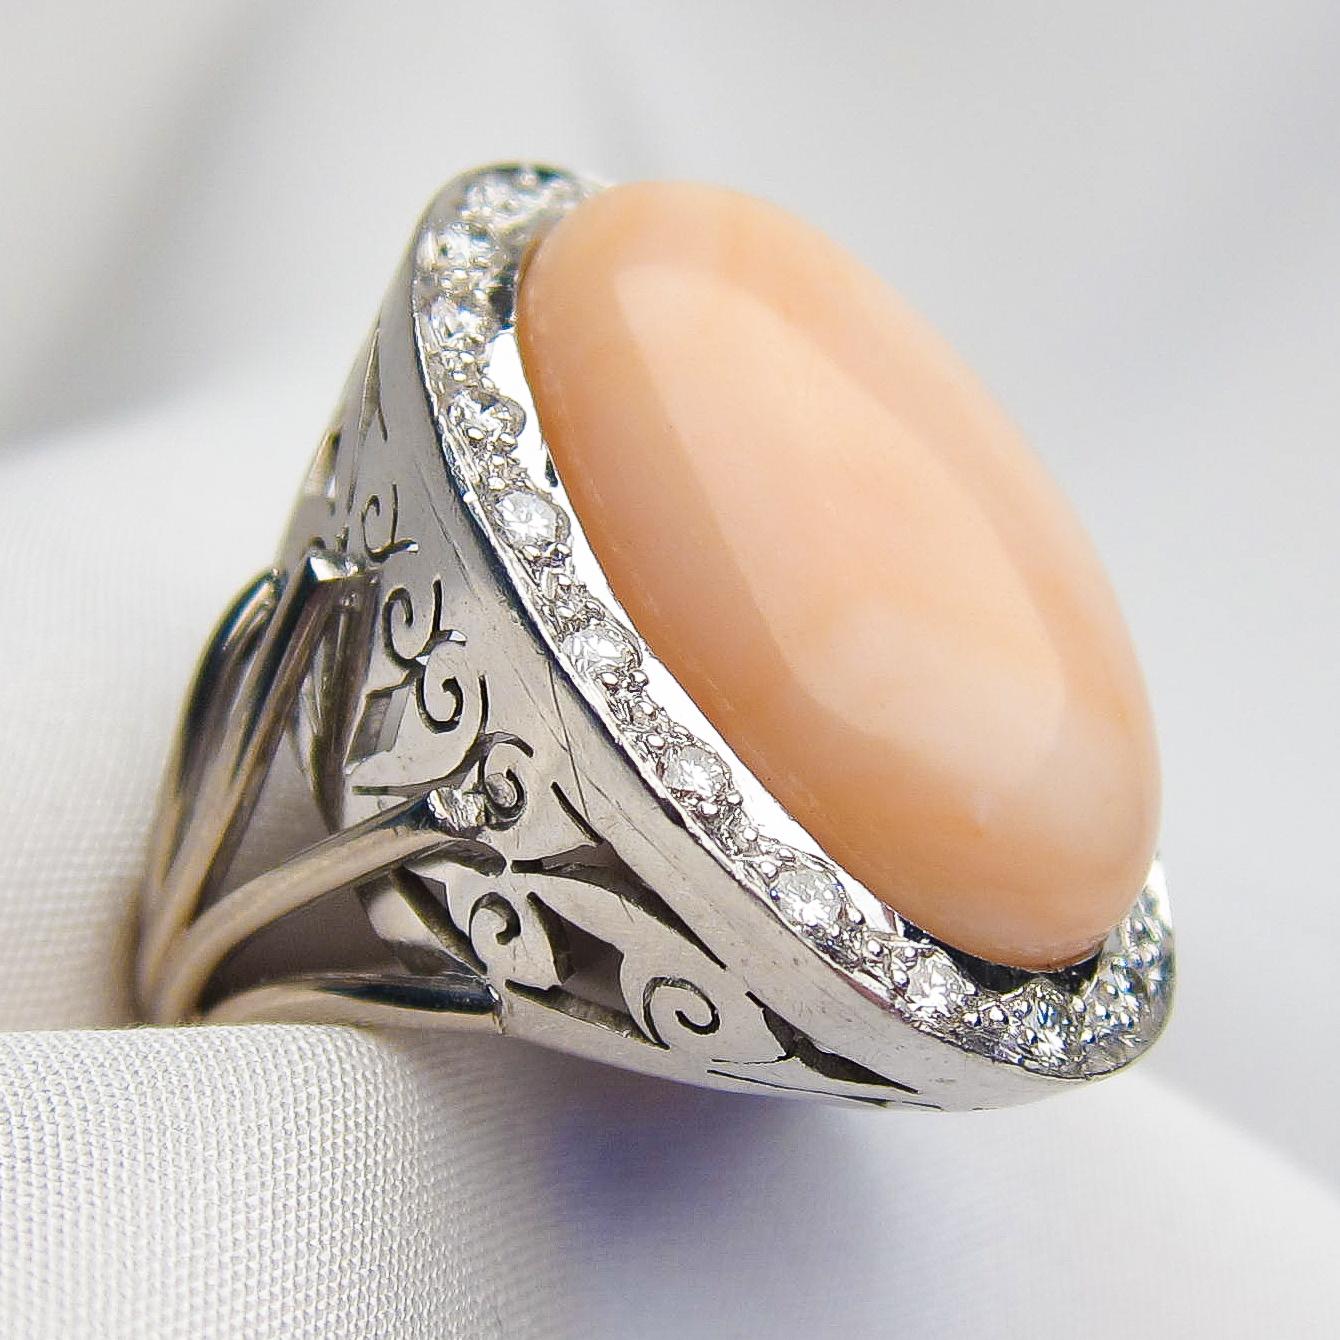 This magnificent midcentury halo ring features an amazing 17.3 carat, oval cabochon-cut pink coral. Bead-set around the coral are 20 round, brilliant-cut diamonds weighing a total of .60 carats, with a VS2 clarity and G-H color. The palladium scroll